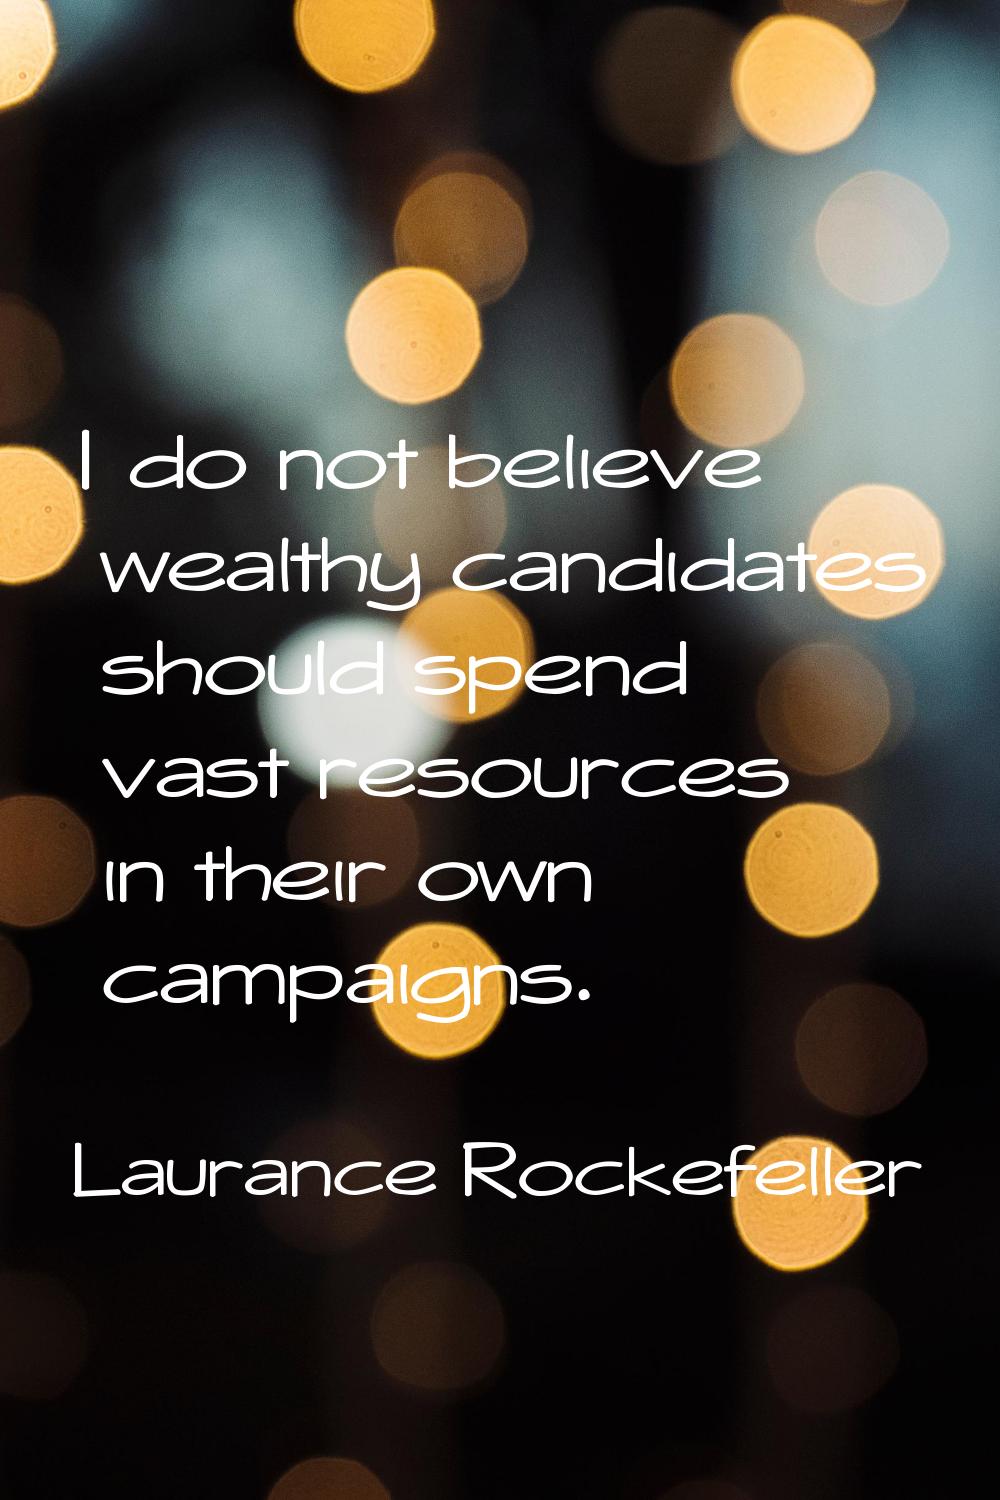 I do not believe wealthy candidates should spend vast resources in their own campaigns.